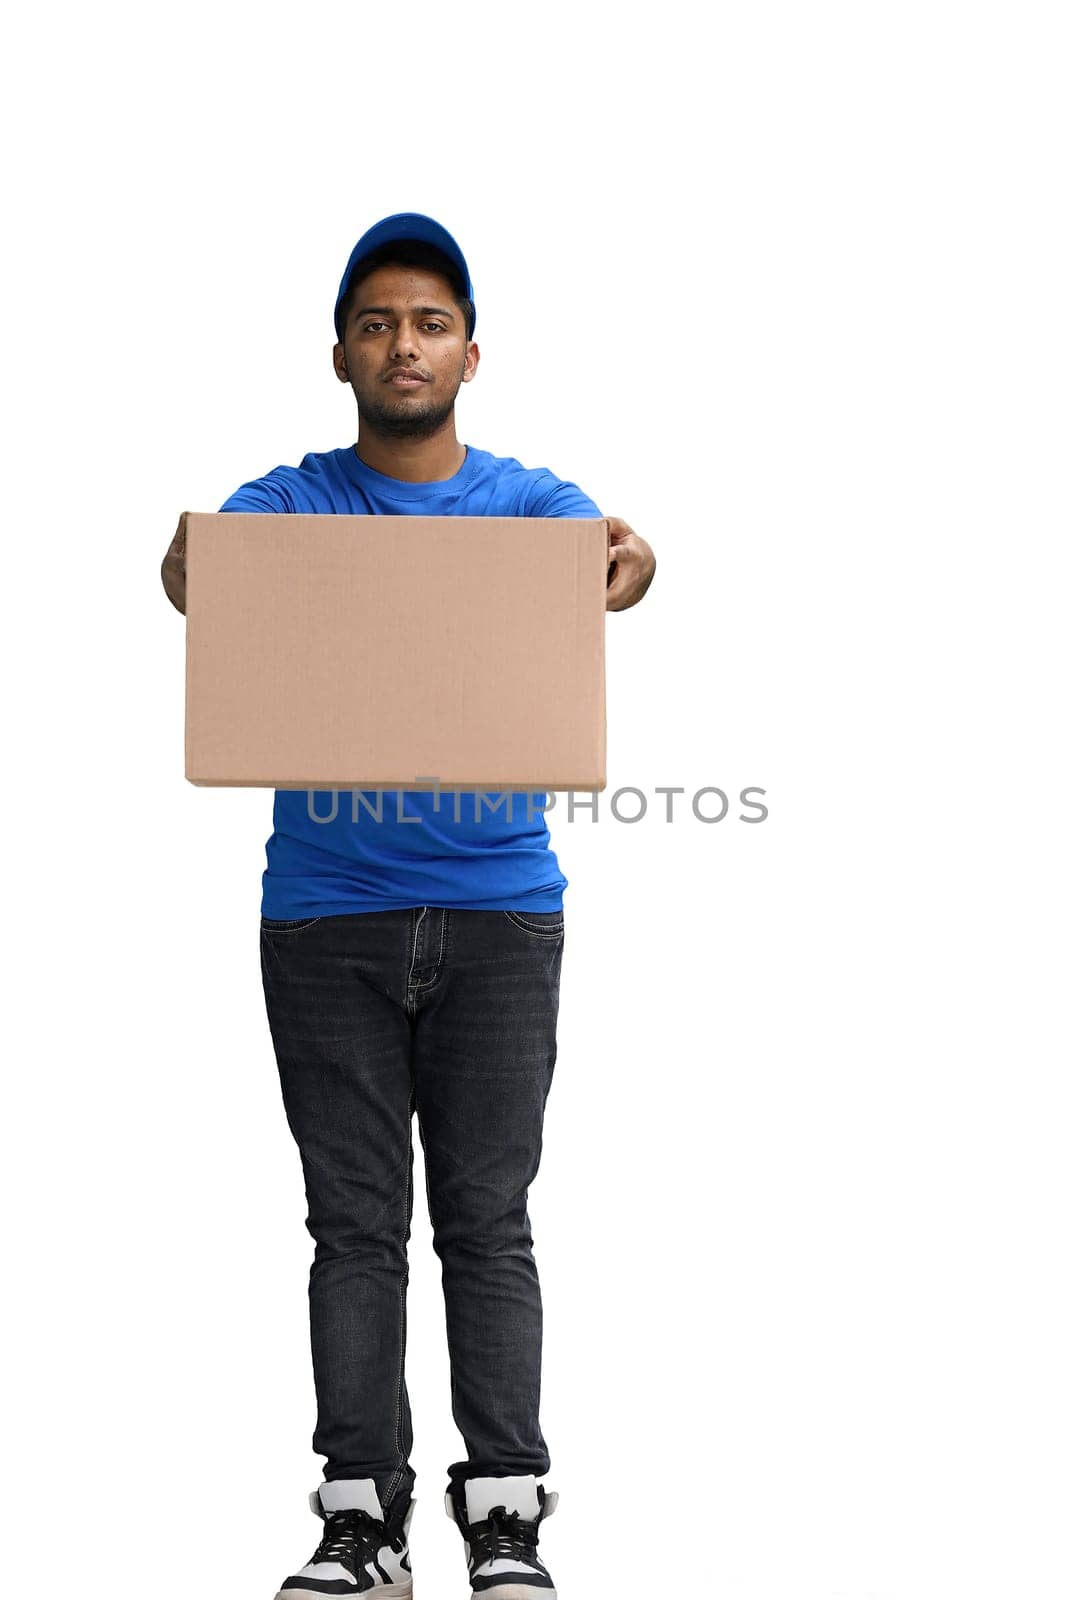 A man on a white background give box by Prosto